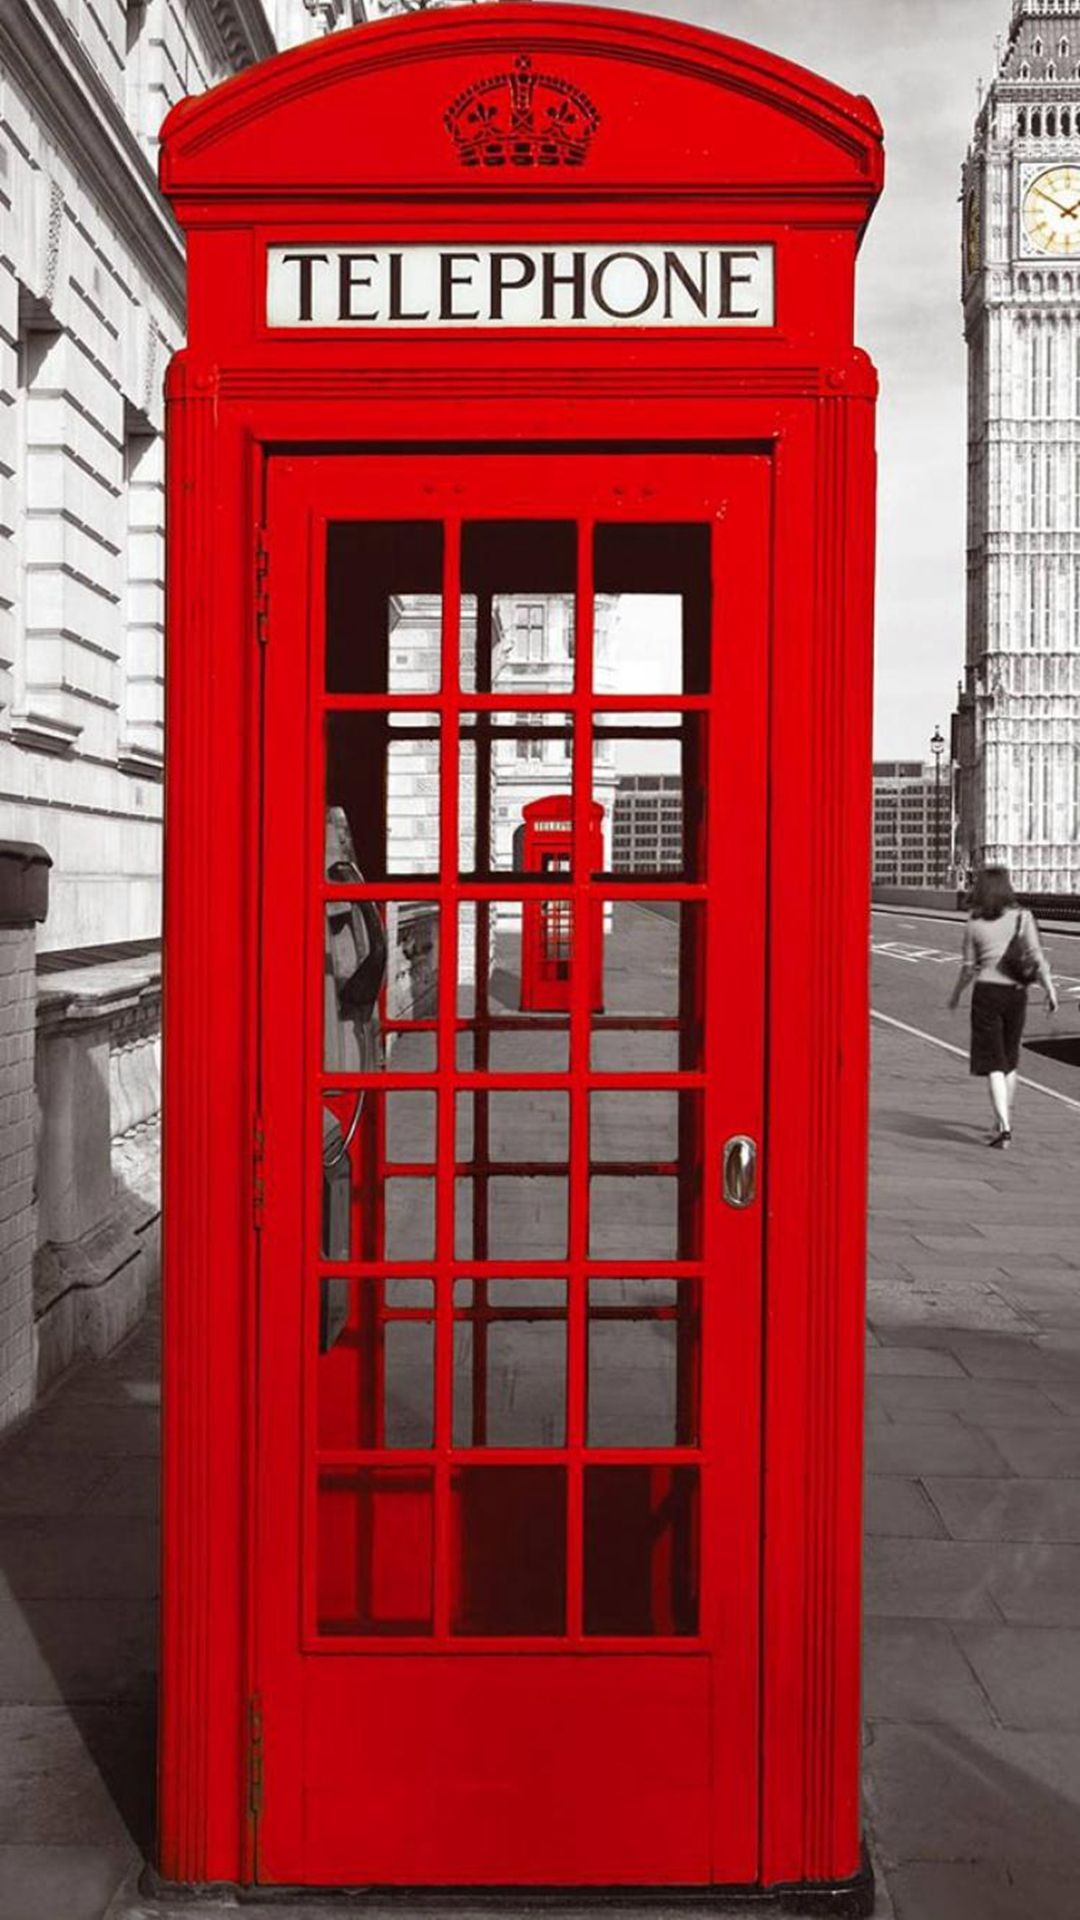 England city street red telephone booth iphone plus wallpaper london phone booth telephone booth london telephone booth